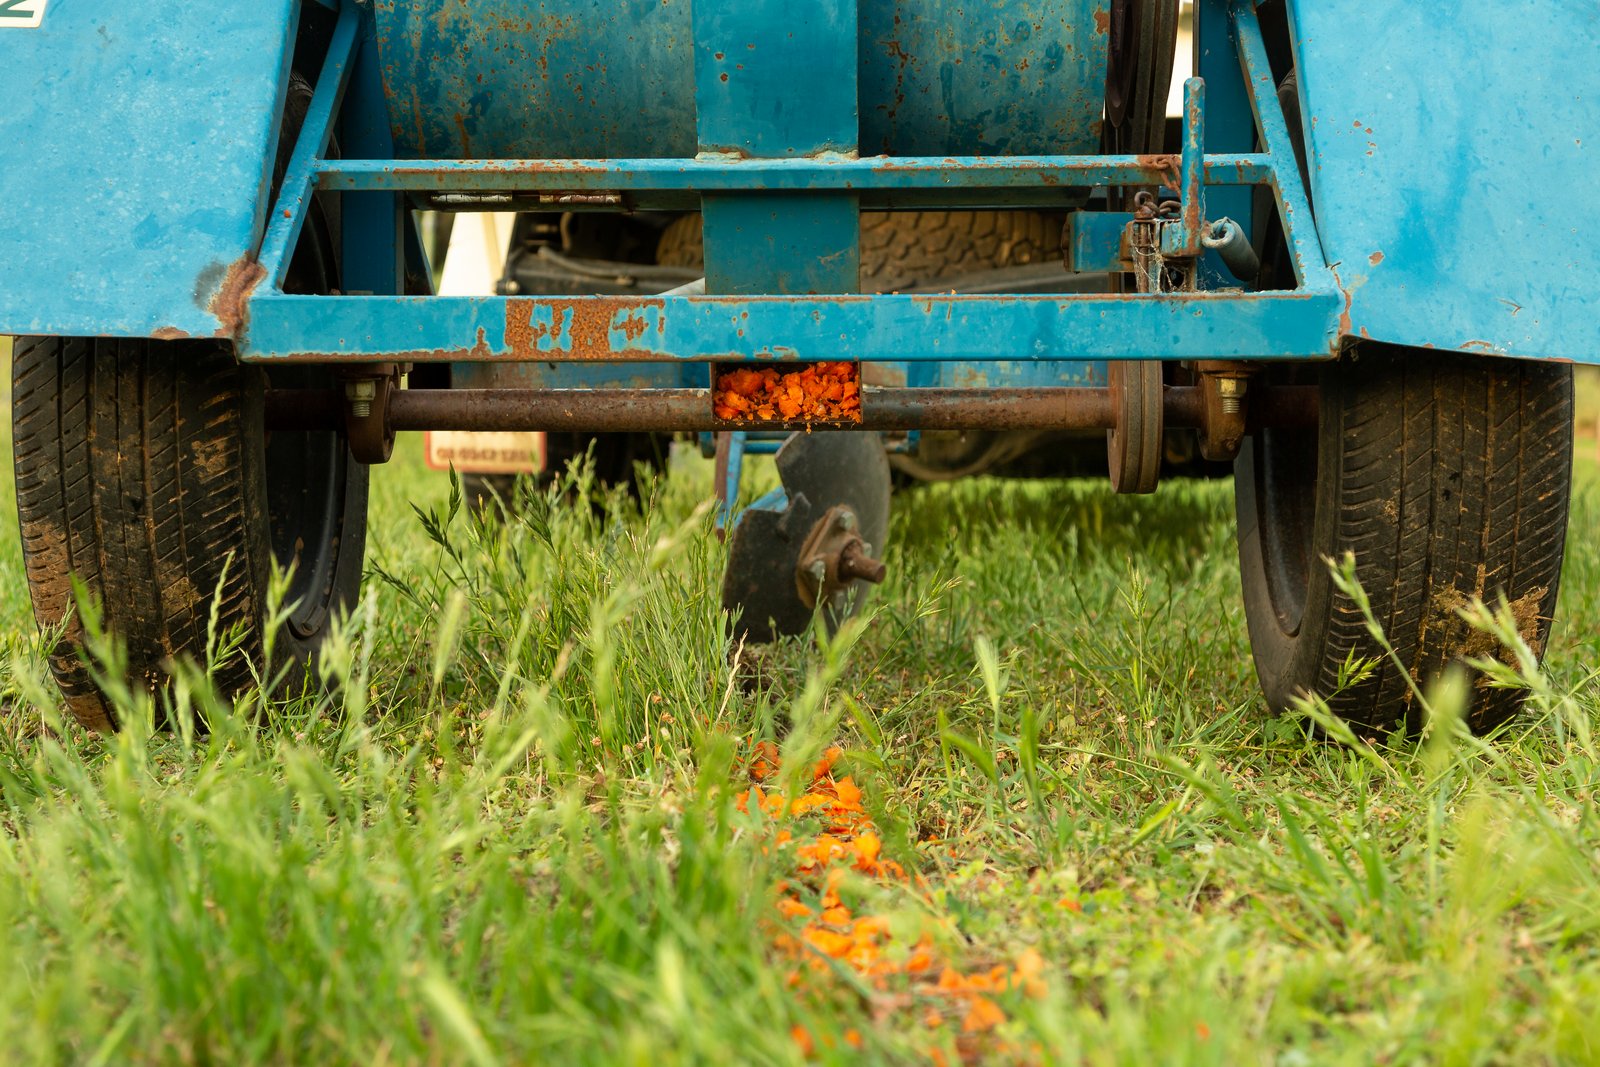 Bait laying device being towed behind a vehicle, dropping a trail of poisoned carrot pieces behind it in a paddock.